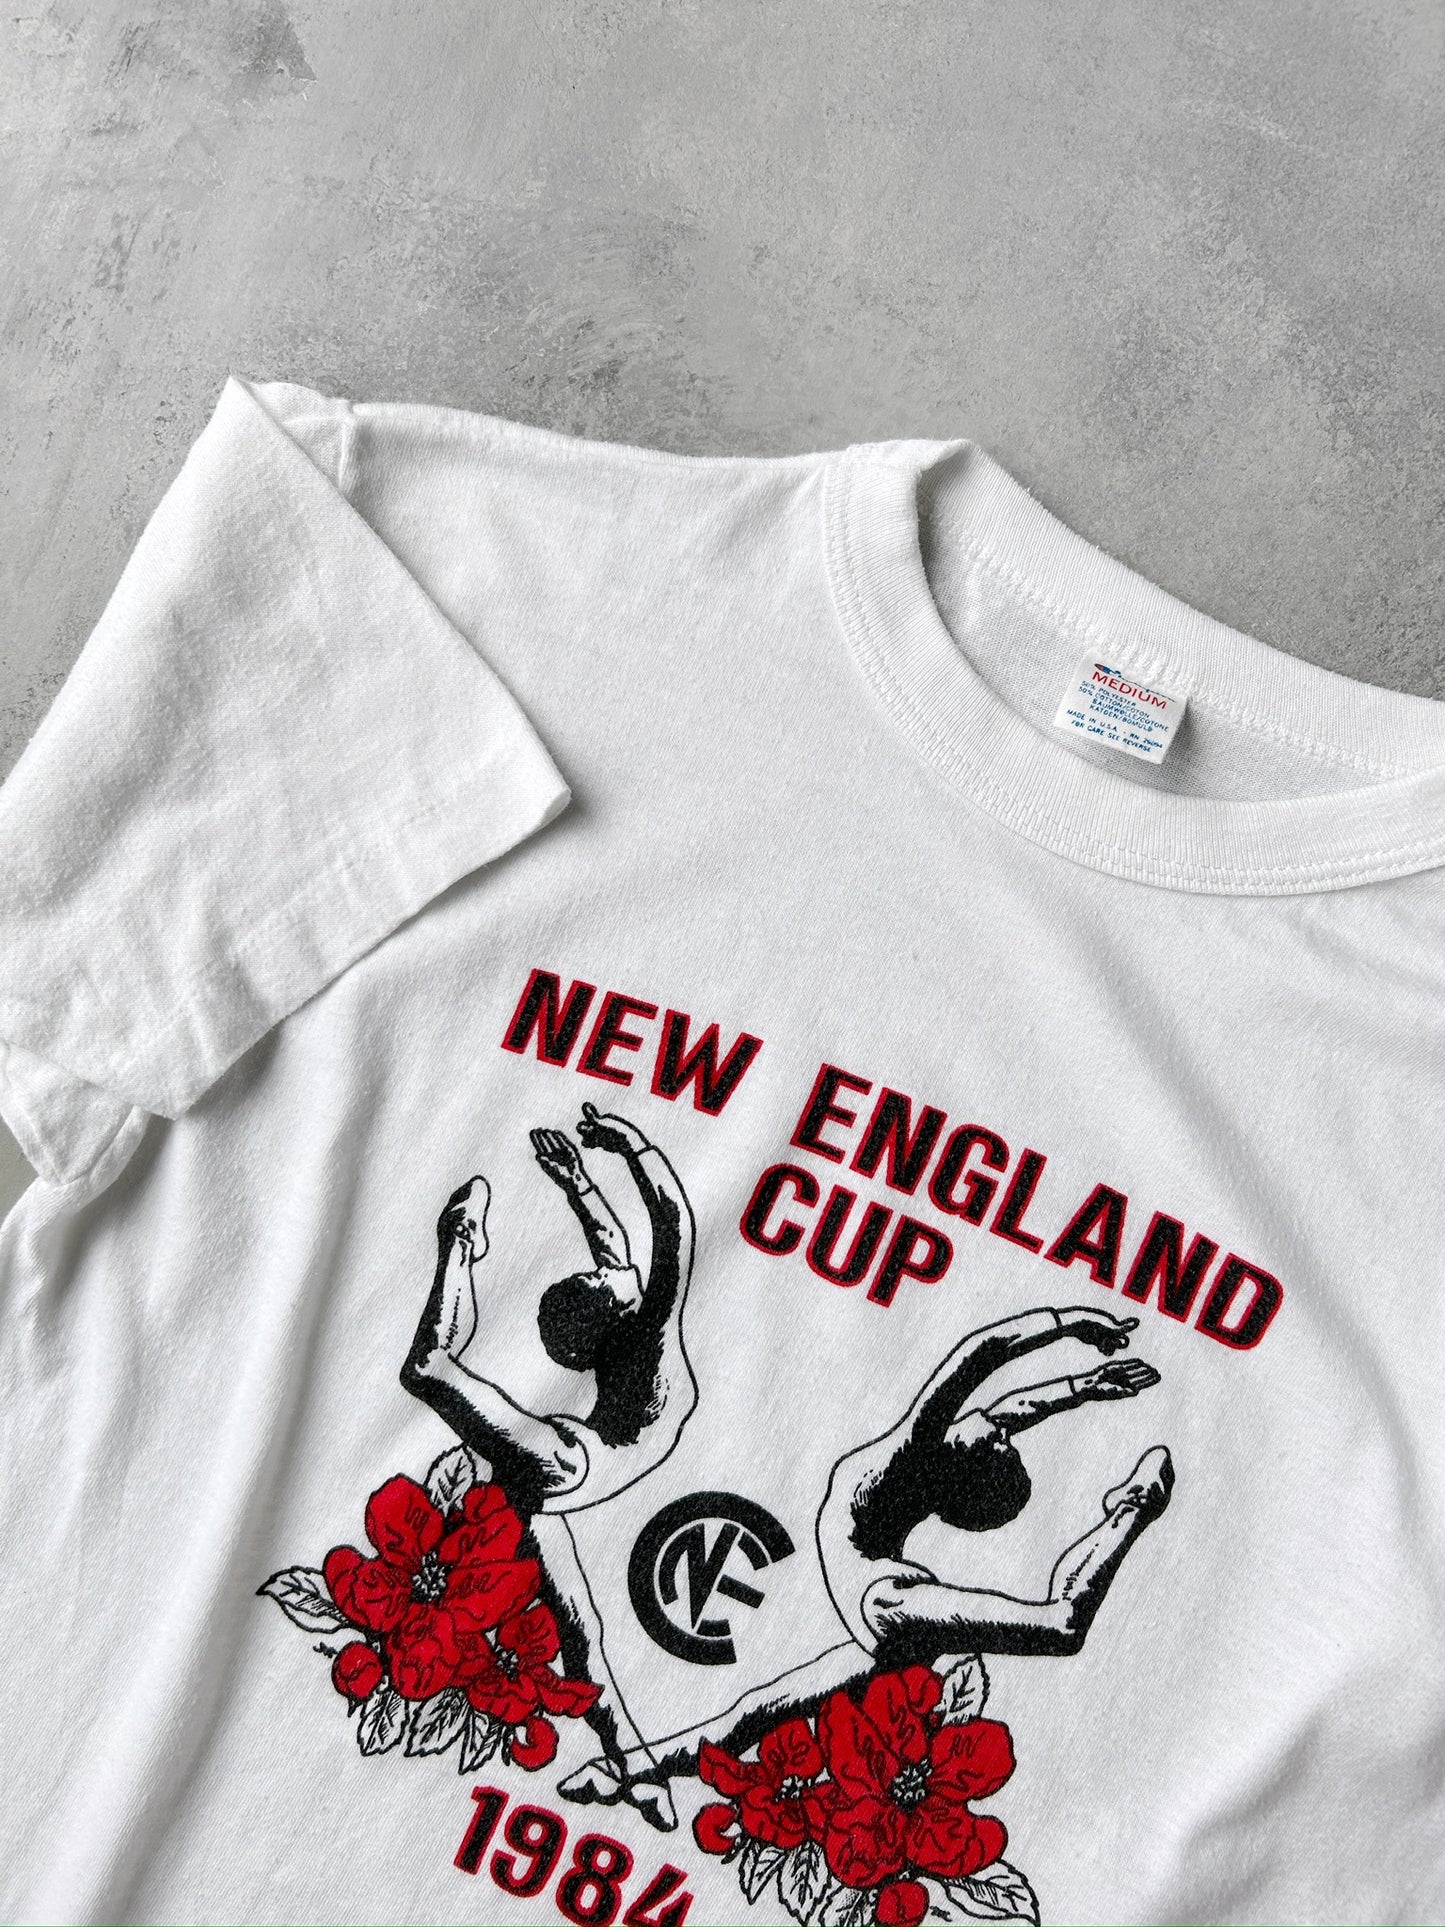 New England Cup T-Shirt '84 - Small